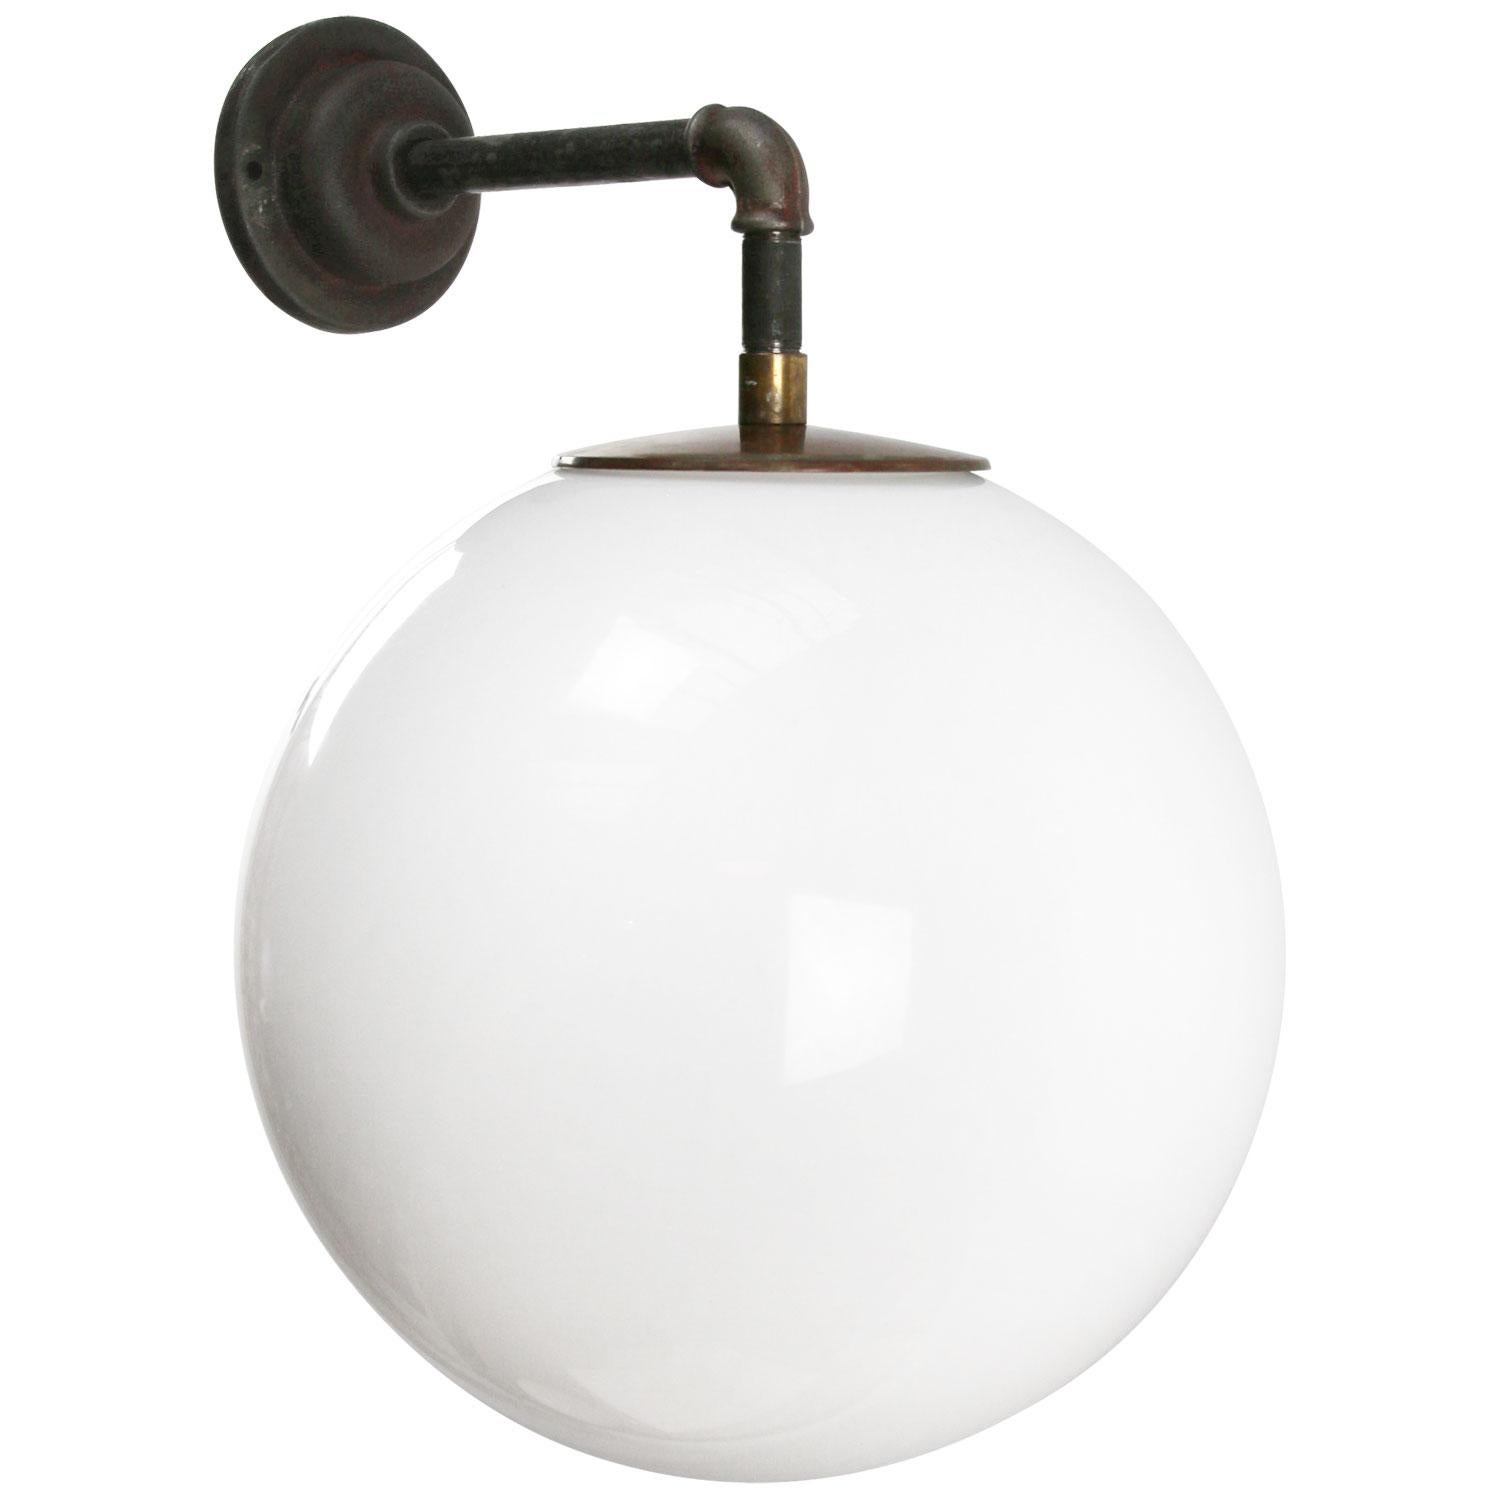 Opaline glass industrial wall light.
Brass top.

Measures: Diameter cast iron wall piece 10.5 cm / 4”, 2 holes to secure

Weight: 5.30 kg / 11.7 lb

Priced per individual item. All lamps have been made suitable by international standards for